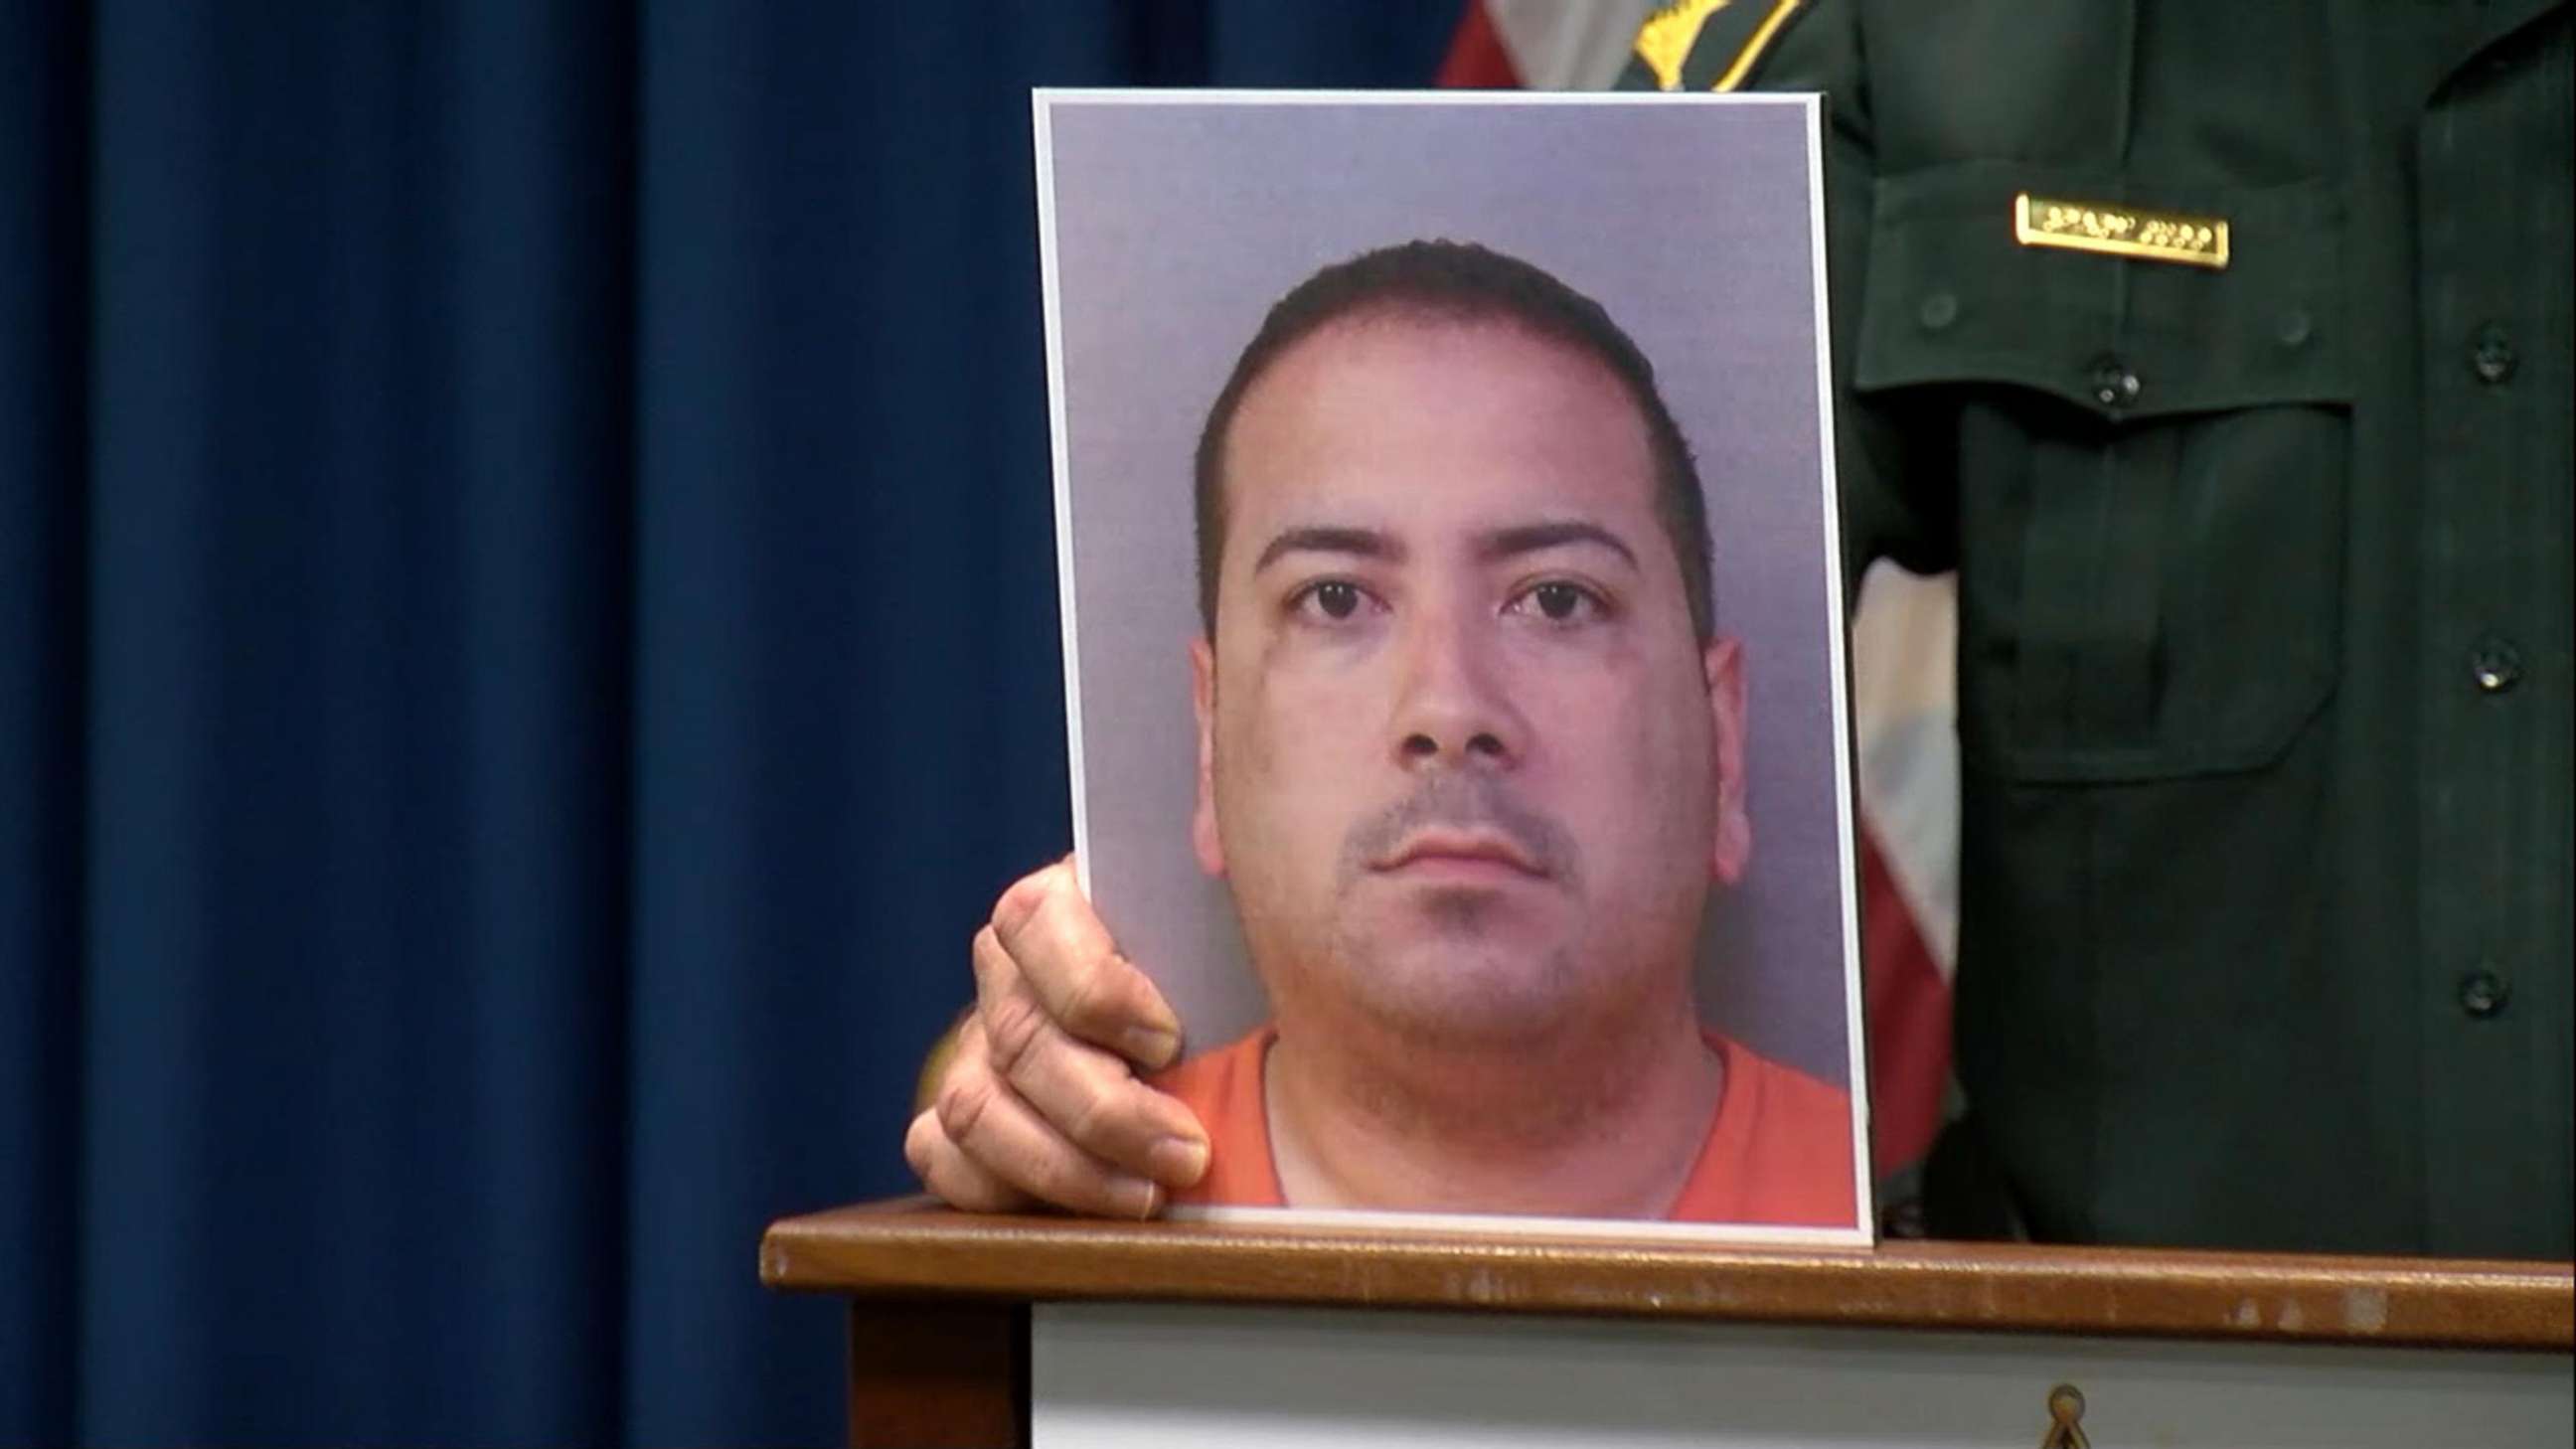 PHOTO: Polk County, Florida, Sheriff Grady Judd holds a photo of  Charles Aguon, the headmaster of a private Christian school, who is suspected of grooming and molesting a 15-year-old student, during a news conference on Feb. 6, 2019.